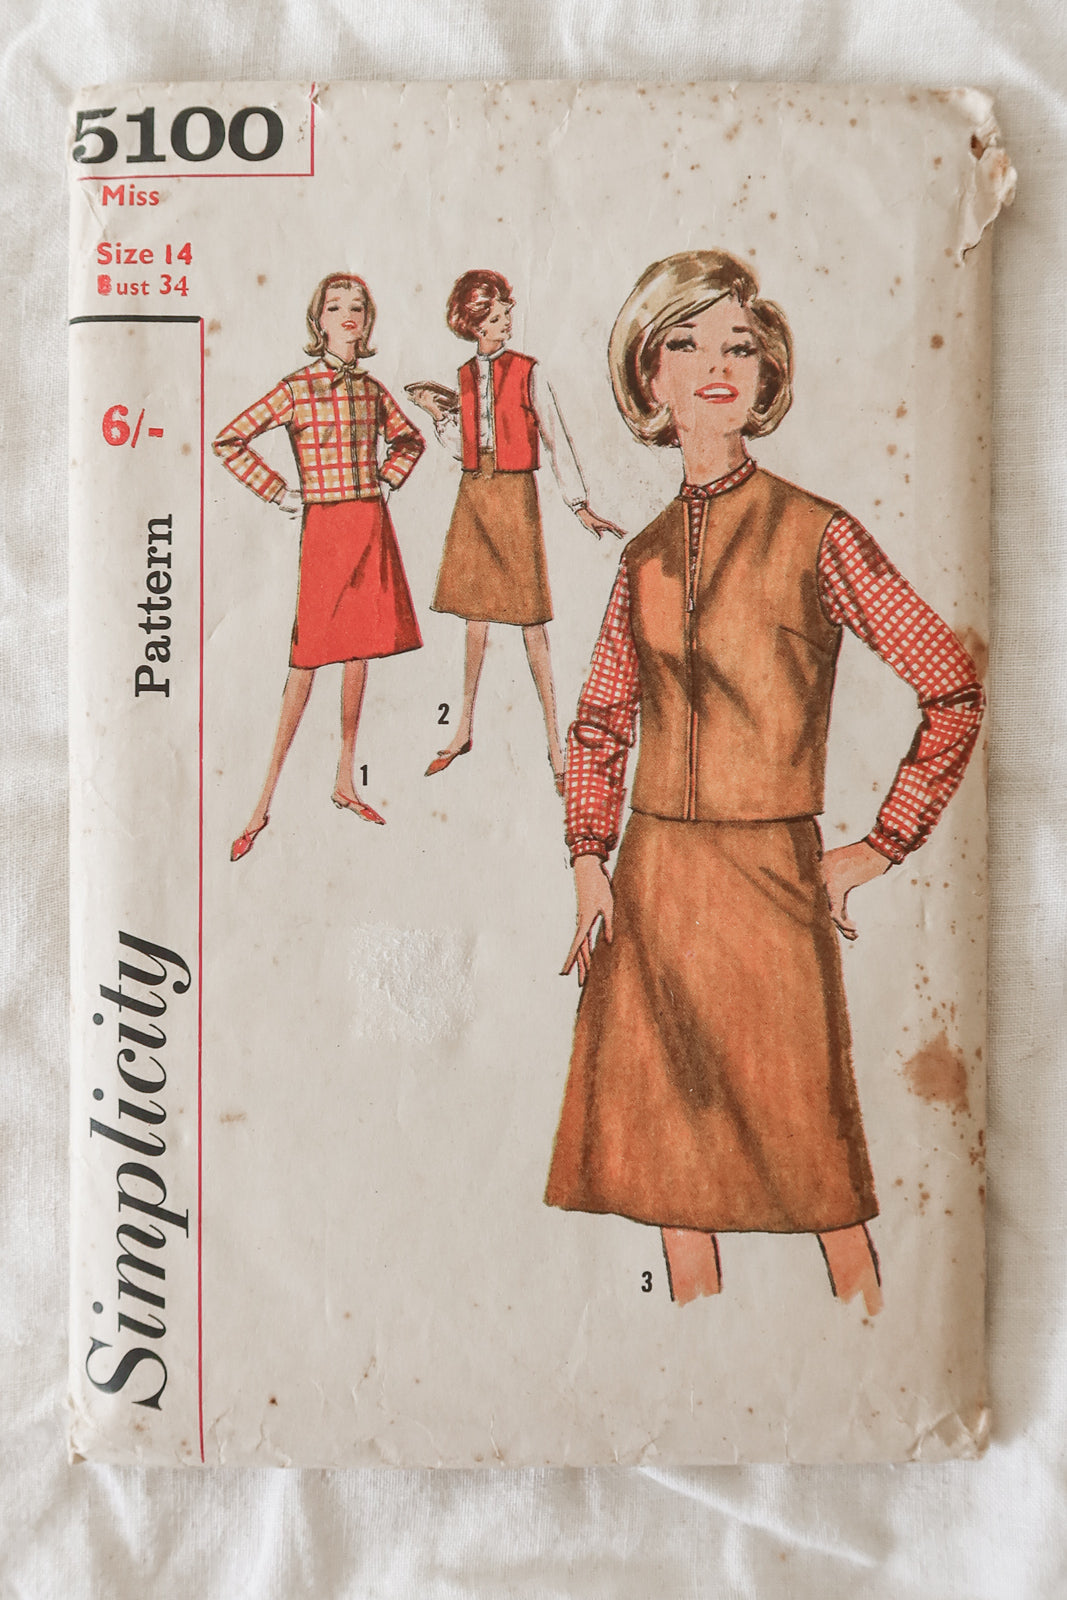 Simplicity 5100 1960s Sewing Pattern